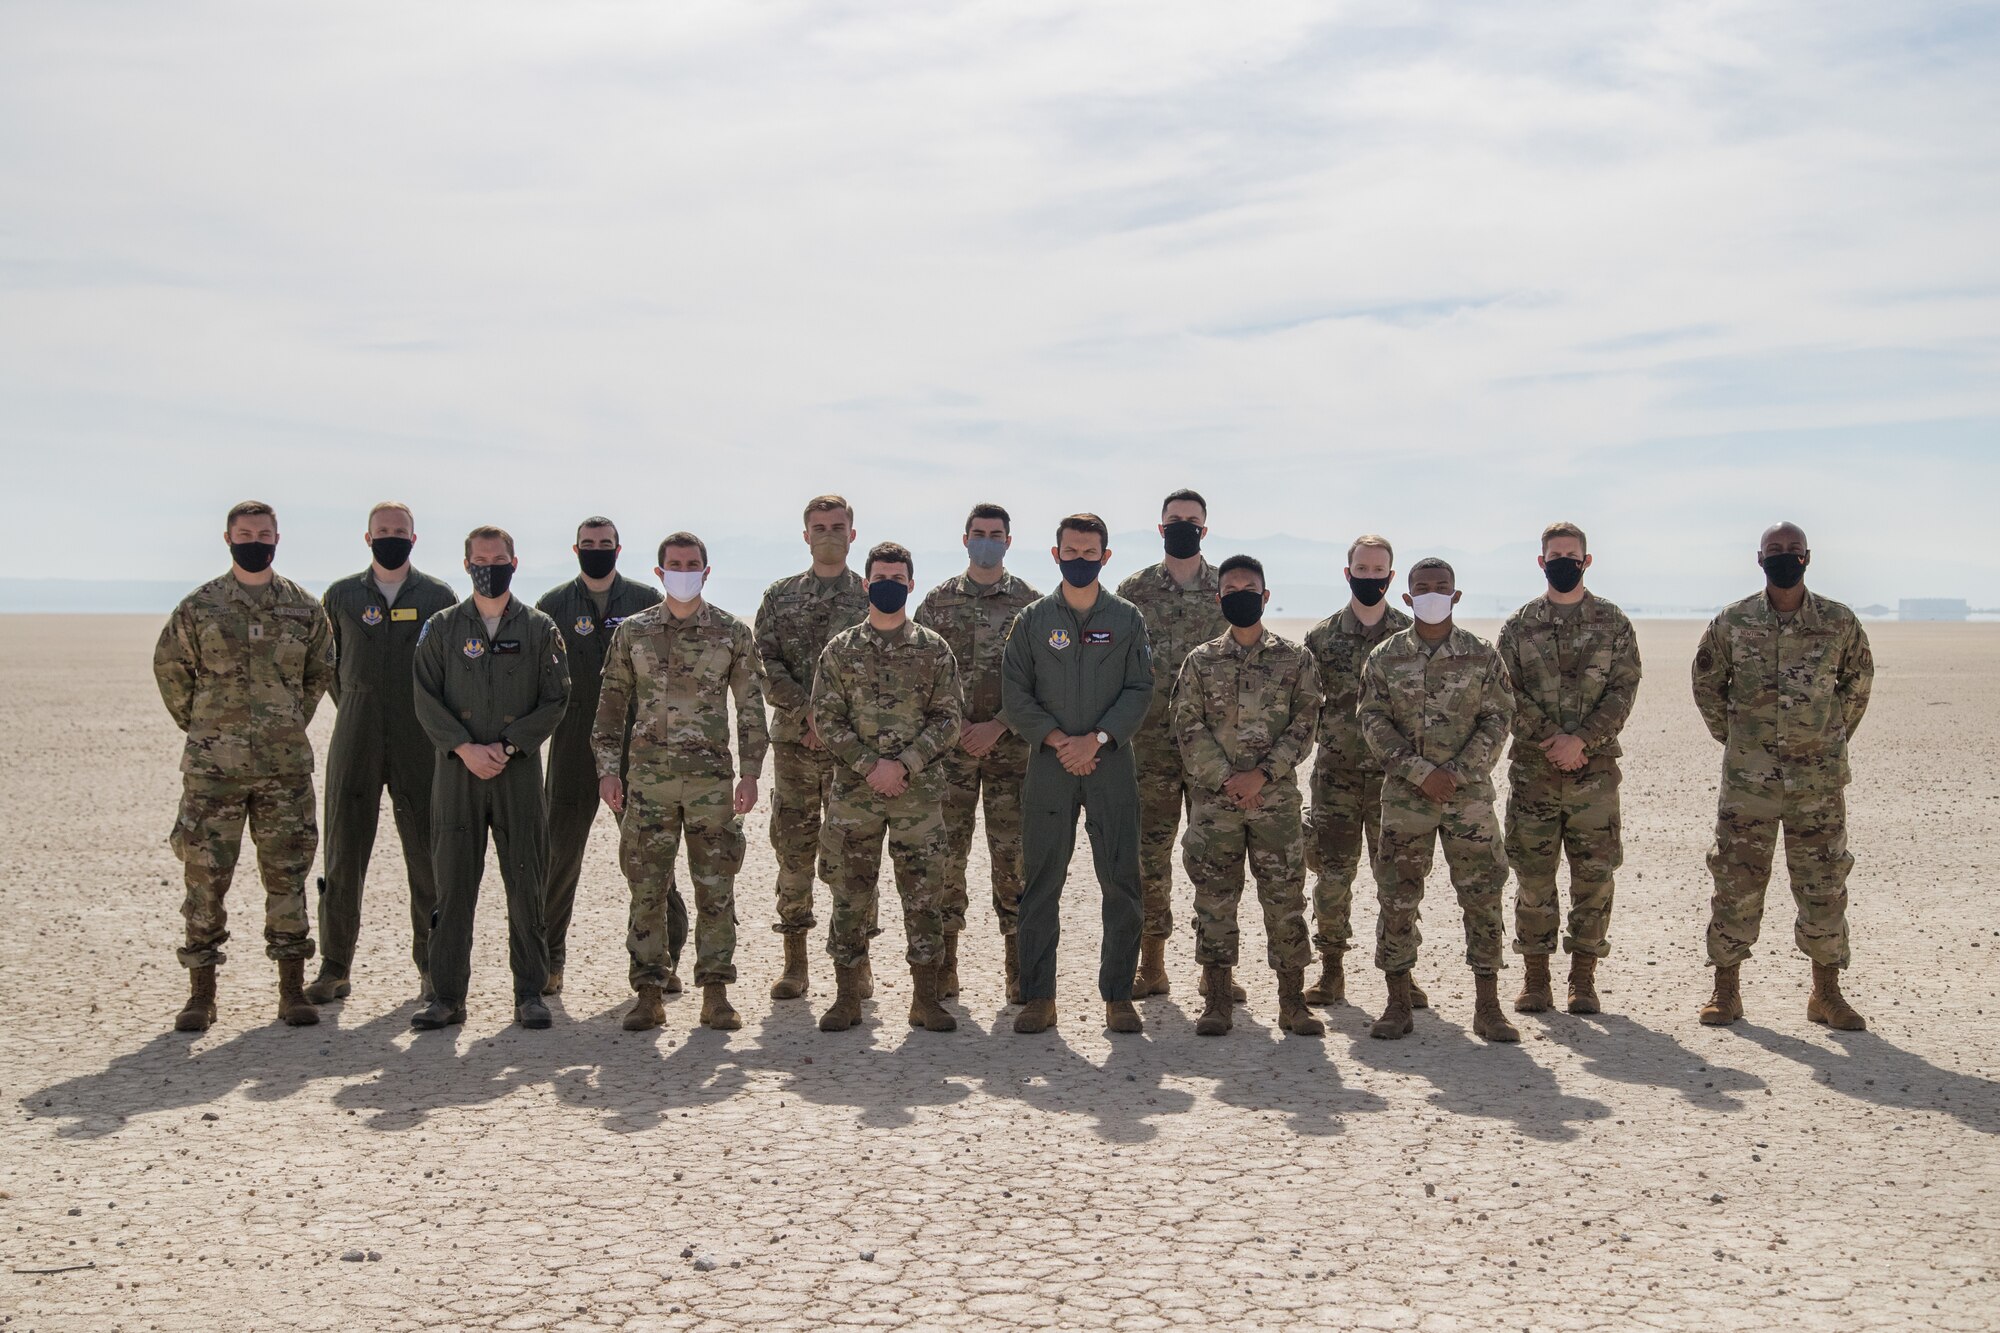 Airmen from Edwards Air Force Base, California, pose for a group photo on the Rogers Dry Lake Bed prior to their U.S. Space Force transfer ceremony, Feb. 11. (Air Force photo by Richard Gonzales)